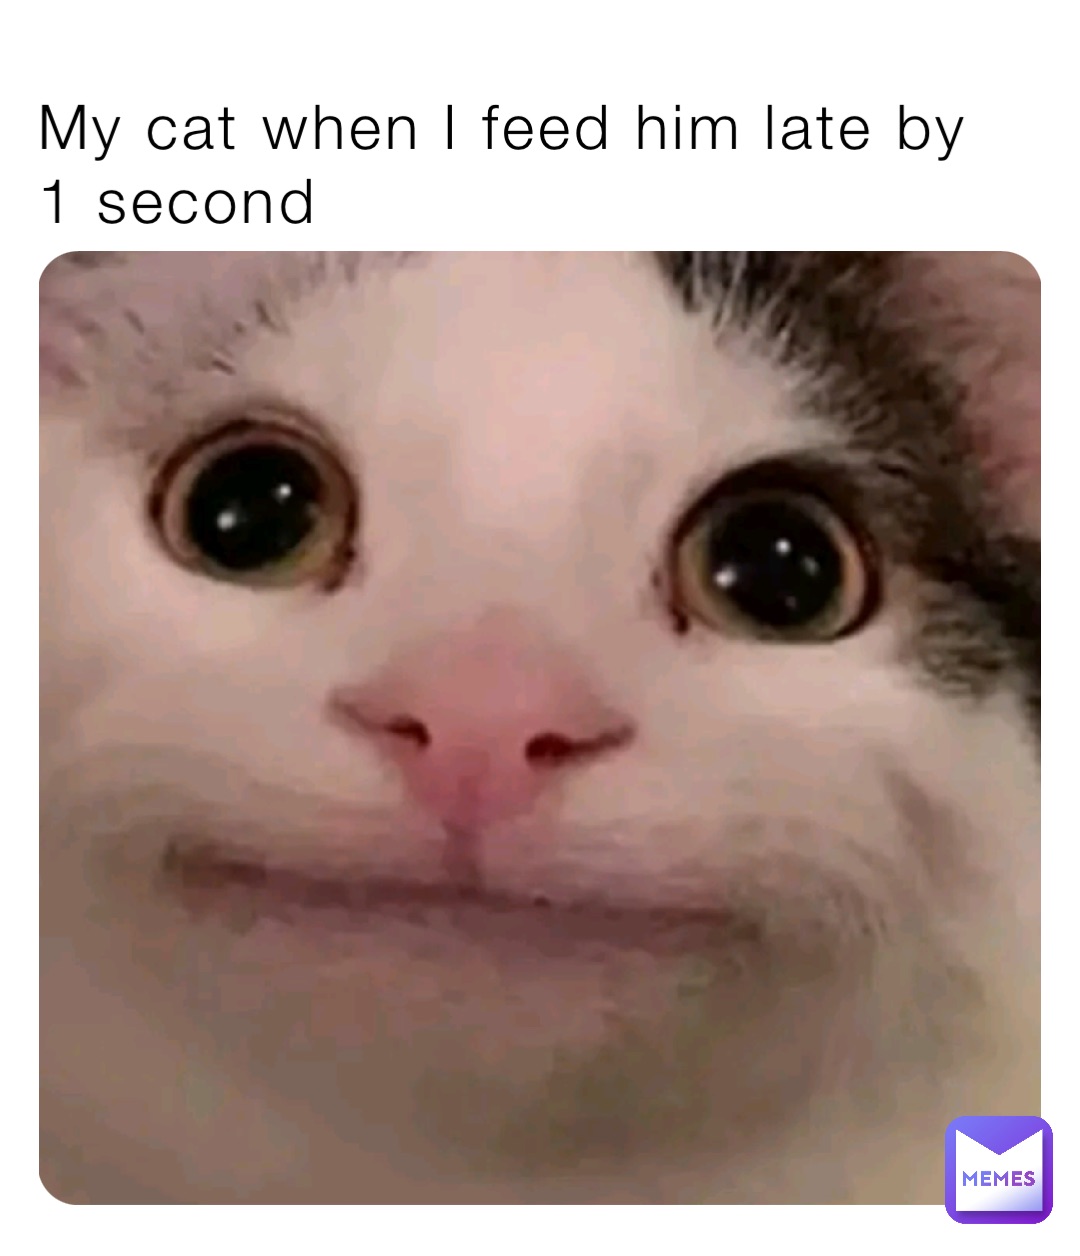 My cat when I feed him late by 1 second